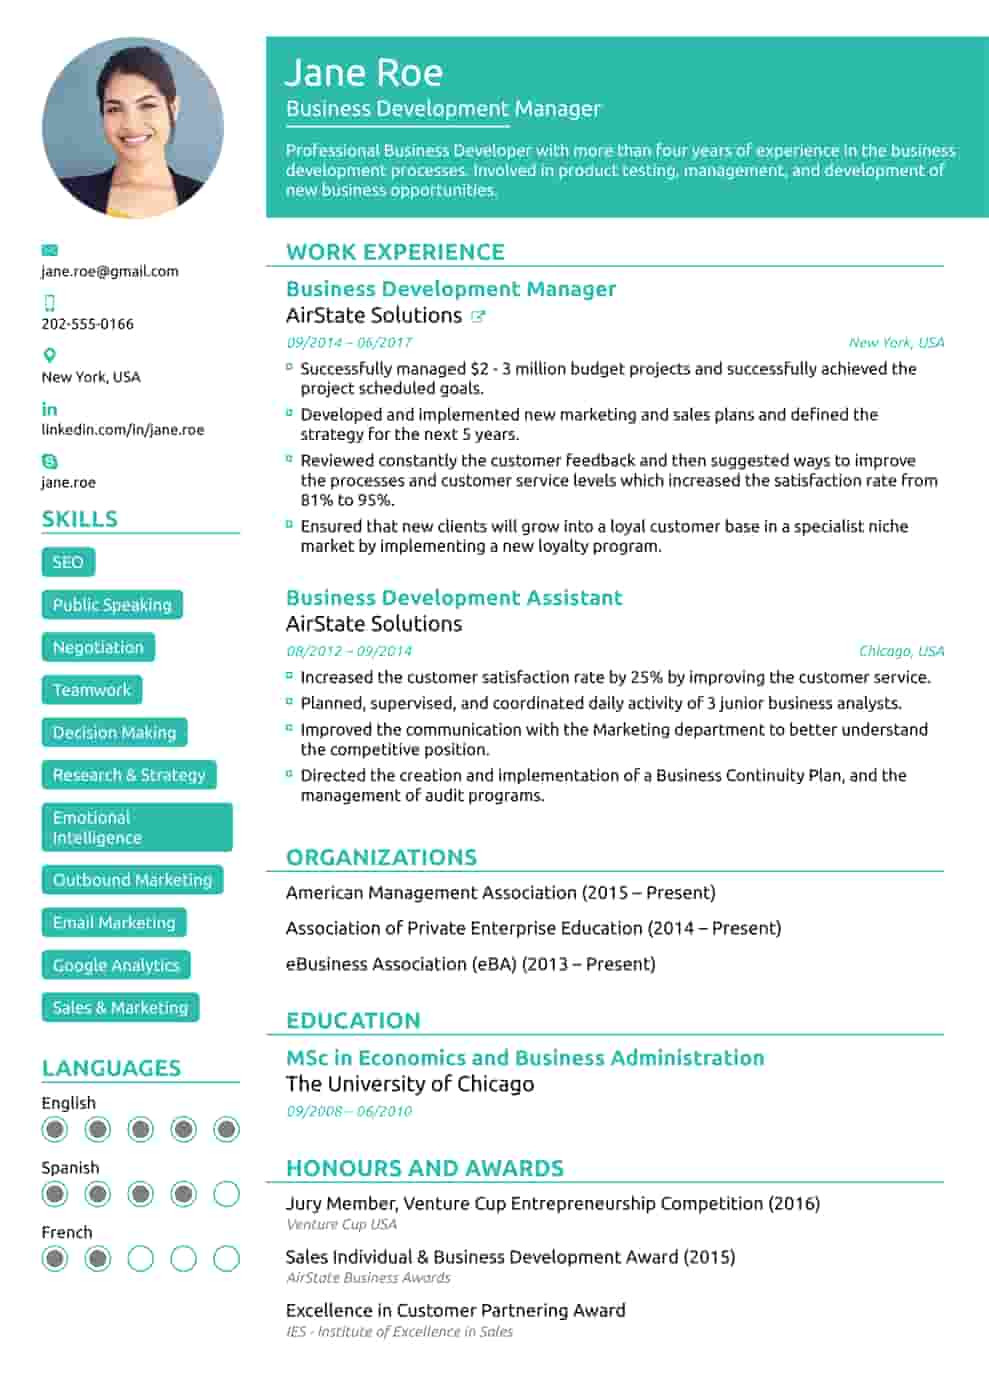 Resume Template that Fits A Lot 29 Free Resume Templates for Microsoft Word (& How to Make Your Own)